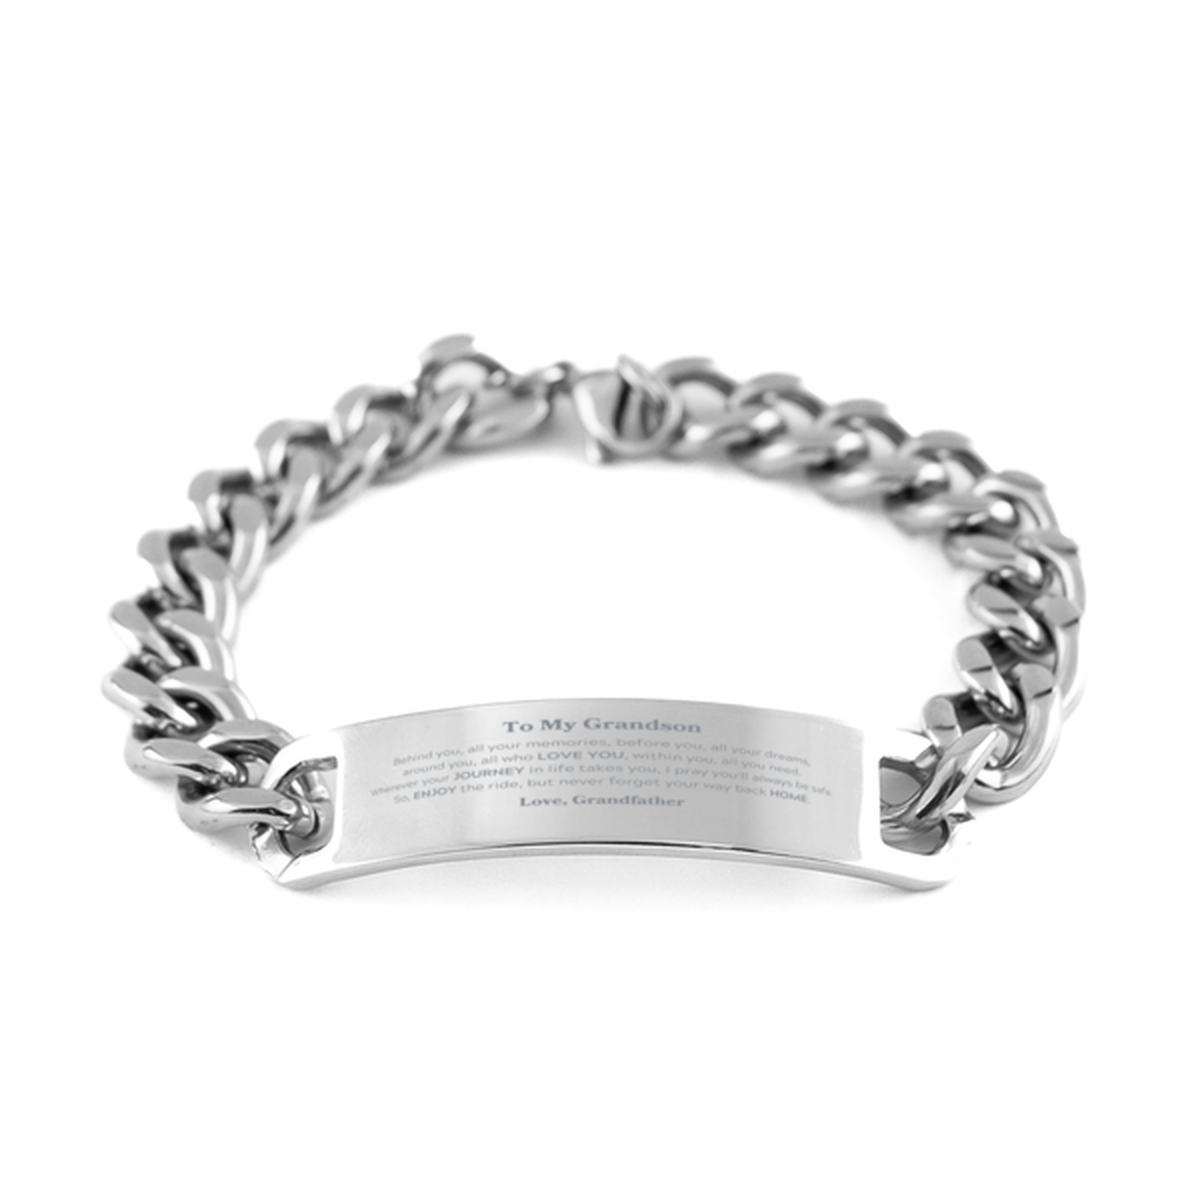 To My Grandson Graduation Gifts from Grandfather, Grandson Cuban Chain Stainless Steel Bracelet Christmas Birthday Gifts for Grandson Behind you, all your memories, before you, all your dreams. Love, Grandfather